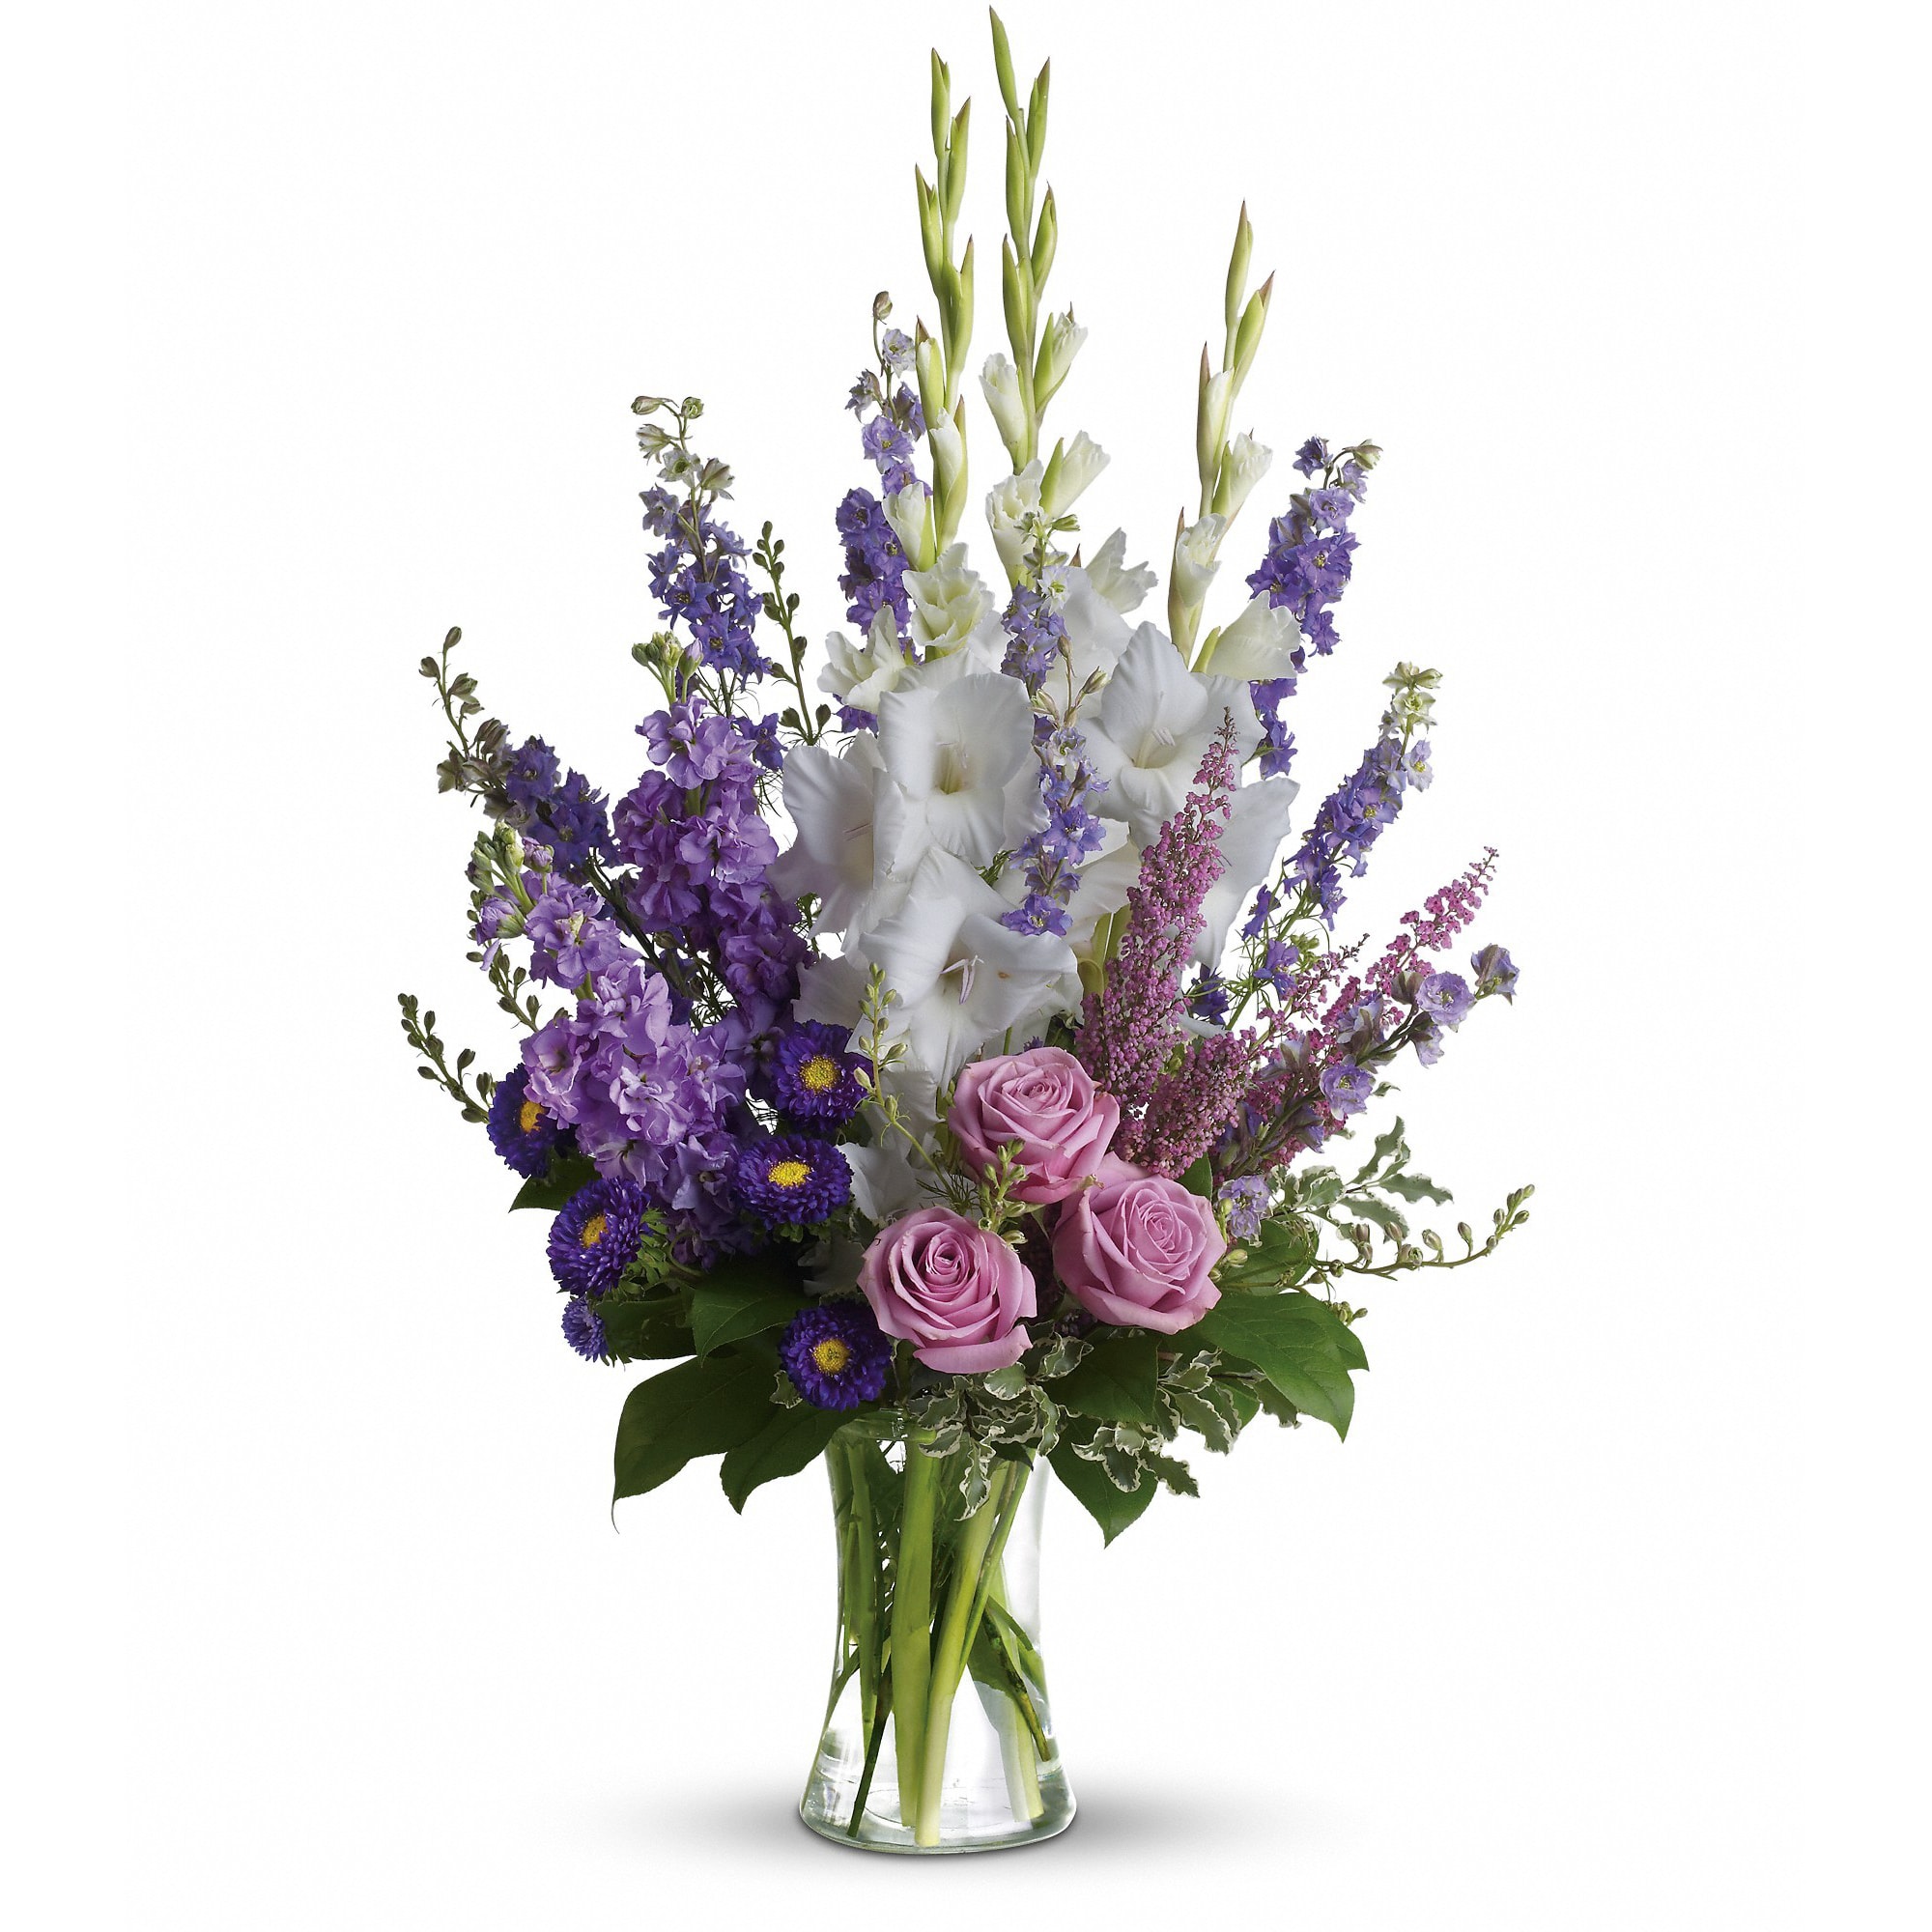 Joyful Memory by Teleflora - Shown as standard Lavender and white sympathy flowers make a grand statement in this joyful bouquet. Cherish your memories with this lasting remembrance of lavender larkspur and roses, deep purple asters, pure white gladioli and the softest pink heather. Three sided, Appropriate for the service or home *We custom design this arrangement and use the freshest flowers available the day of delivery. The arrangement in this picture is an example of the size and style and may not feature the exact product shown.* 